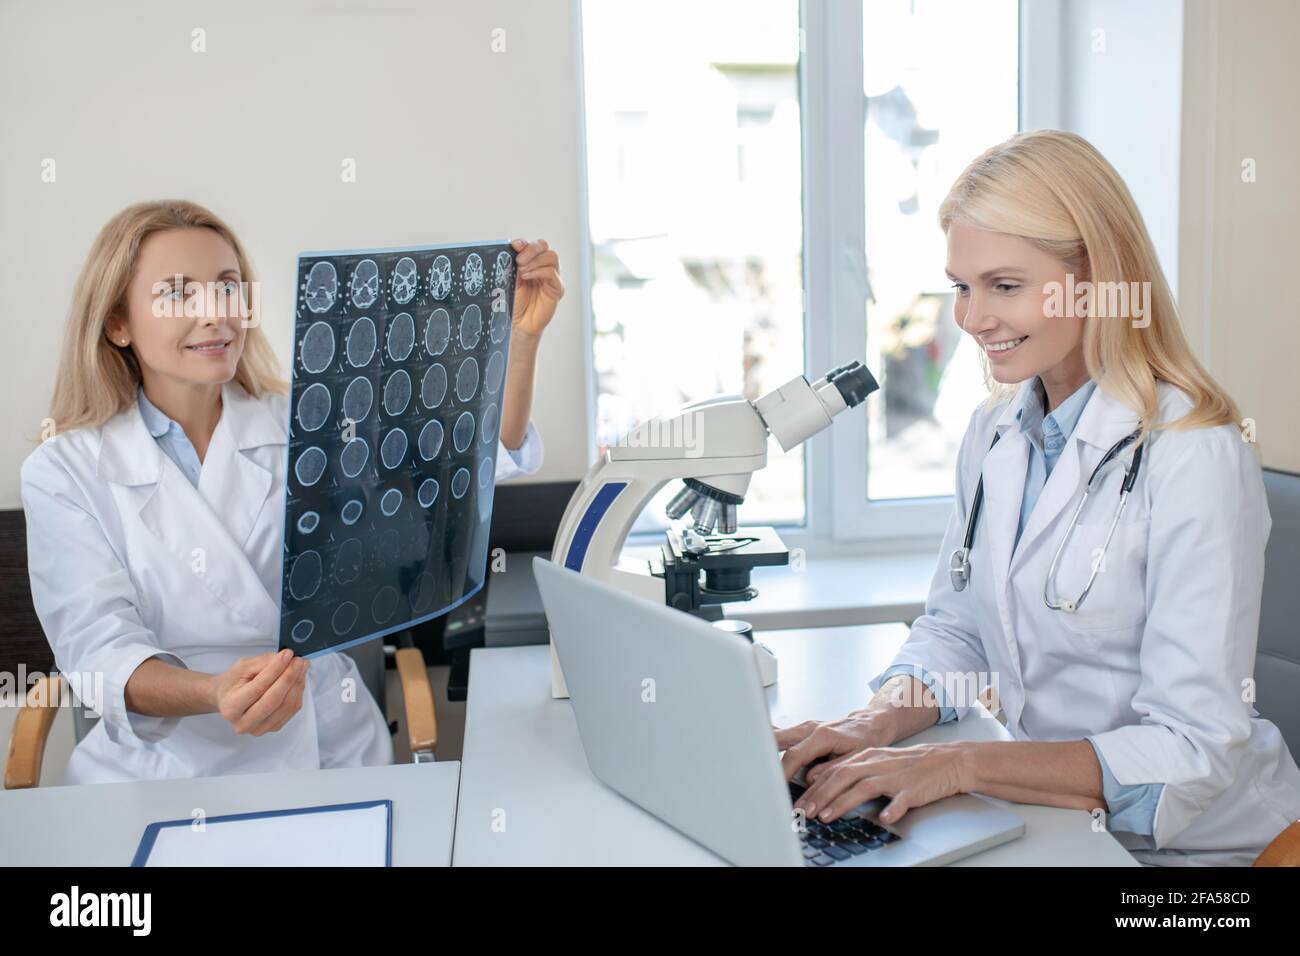 Two women in medical gowns are busy in office Stock Photo